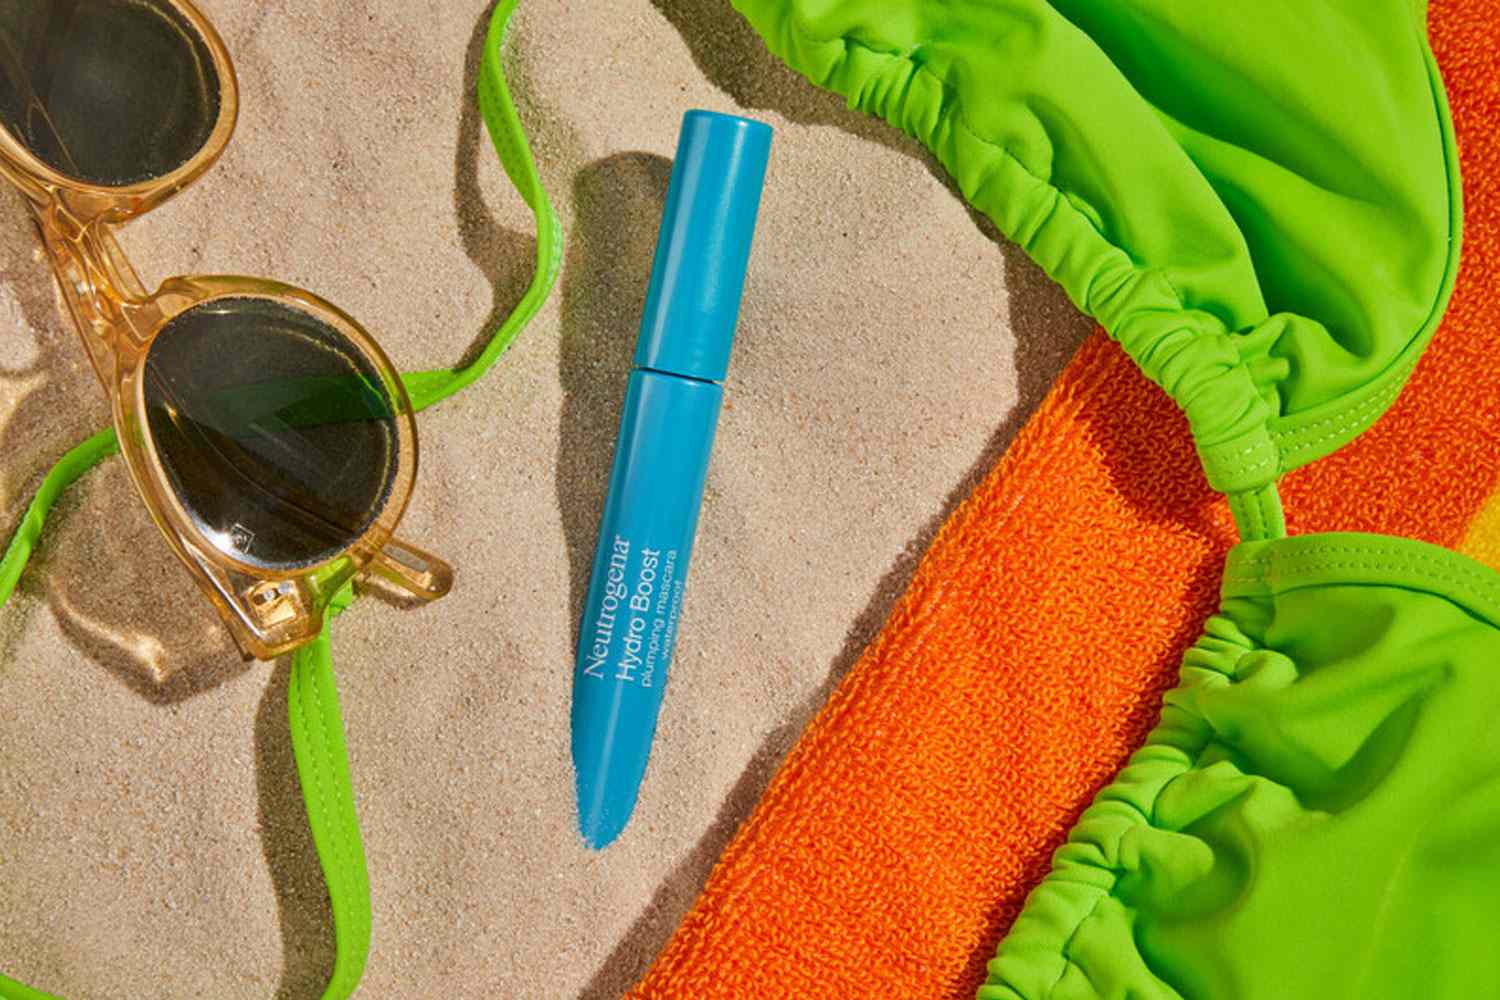 Neutrogena Hydro Boost Plumping Mascara Tested sits in sand with bikini top and sunglasses